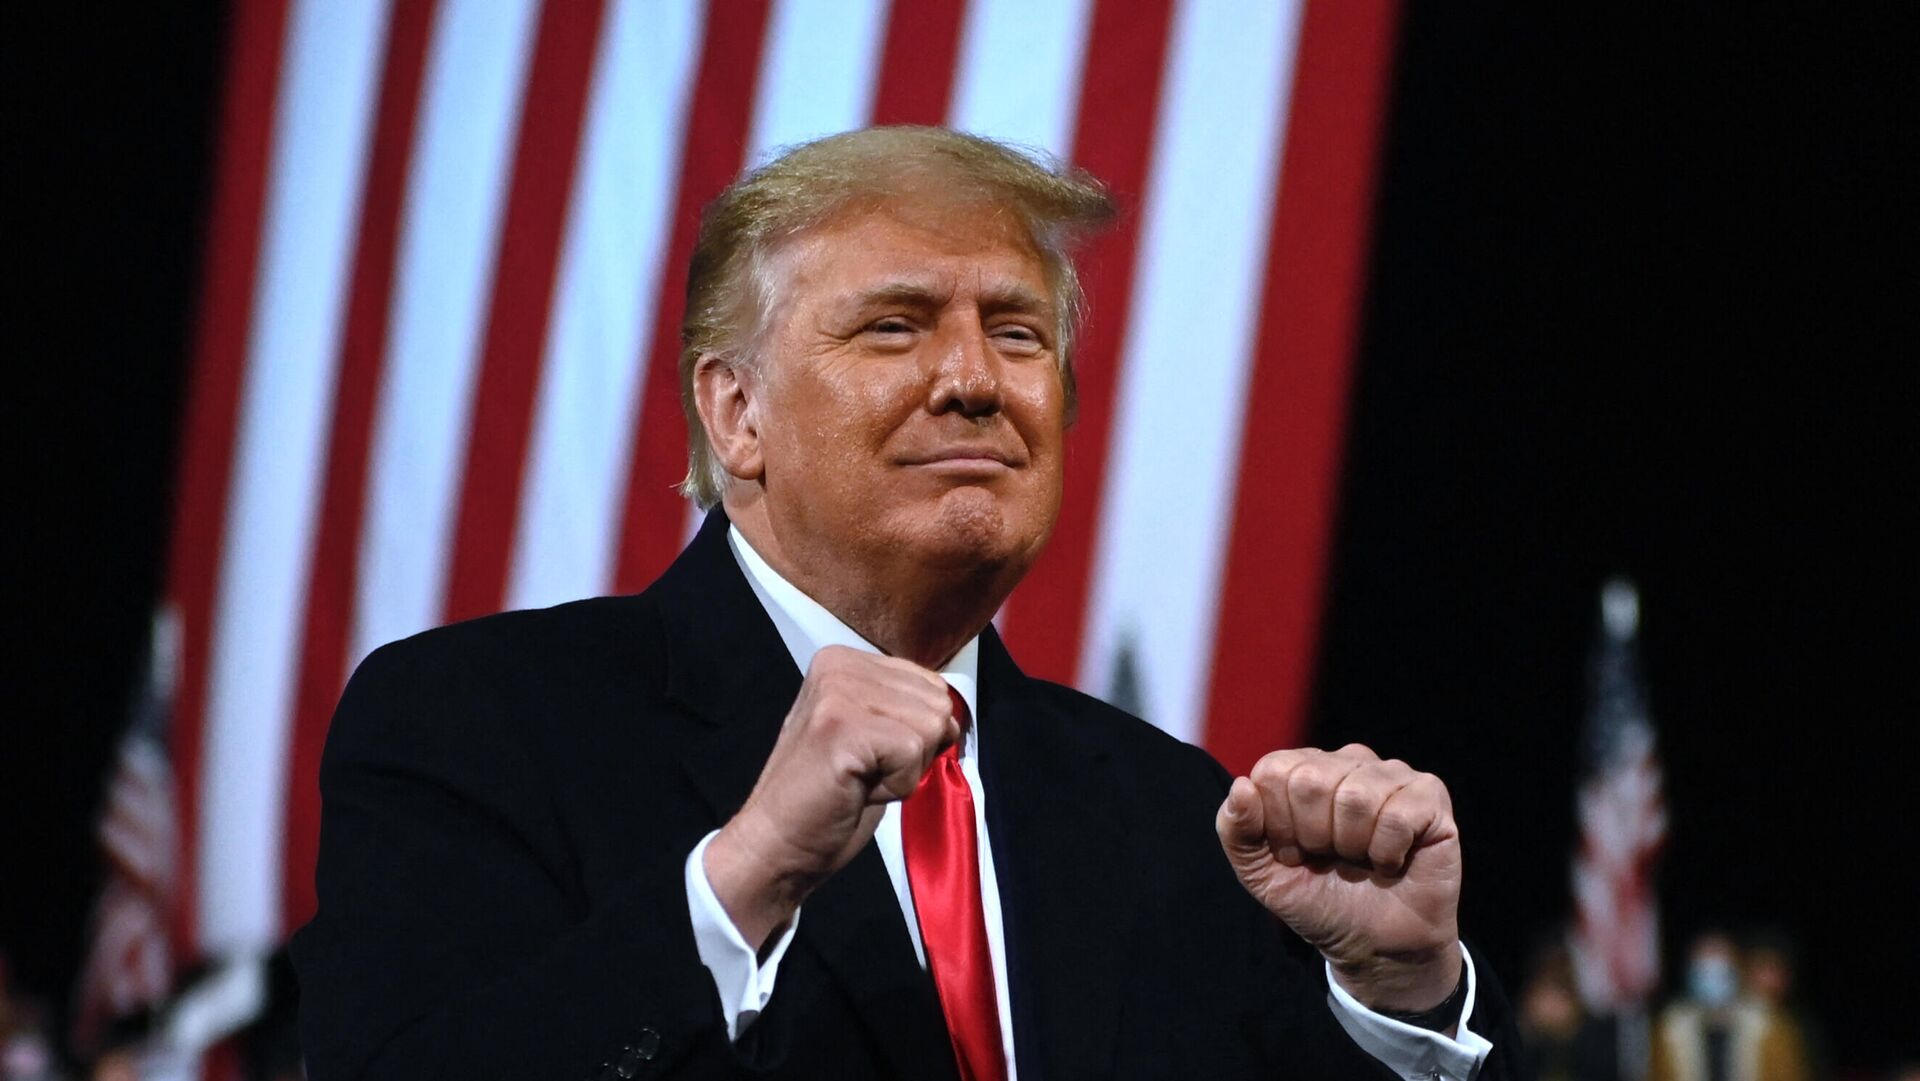 In this file photo taken on December 05, 2020 US President Donald Trump holds up his fists at the end of a rally to support Republican Senate candidates at Valdosta Regional Airport in Valdosta, Georgia. - Sputnik International, 1920, 11.09.2021